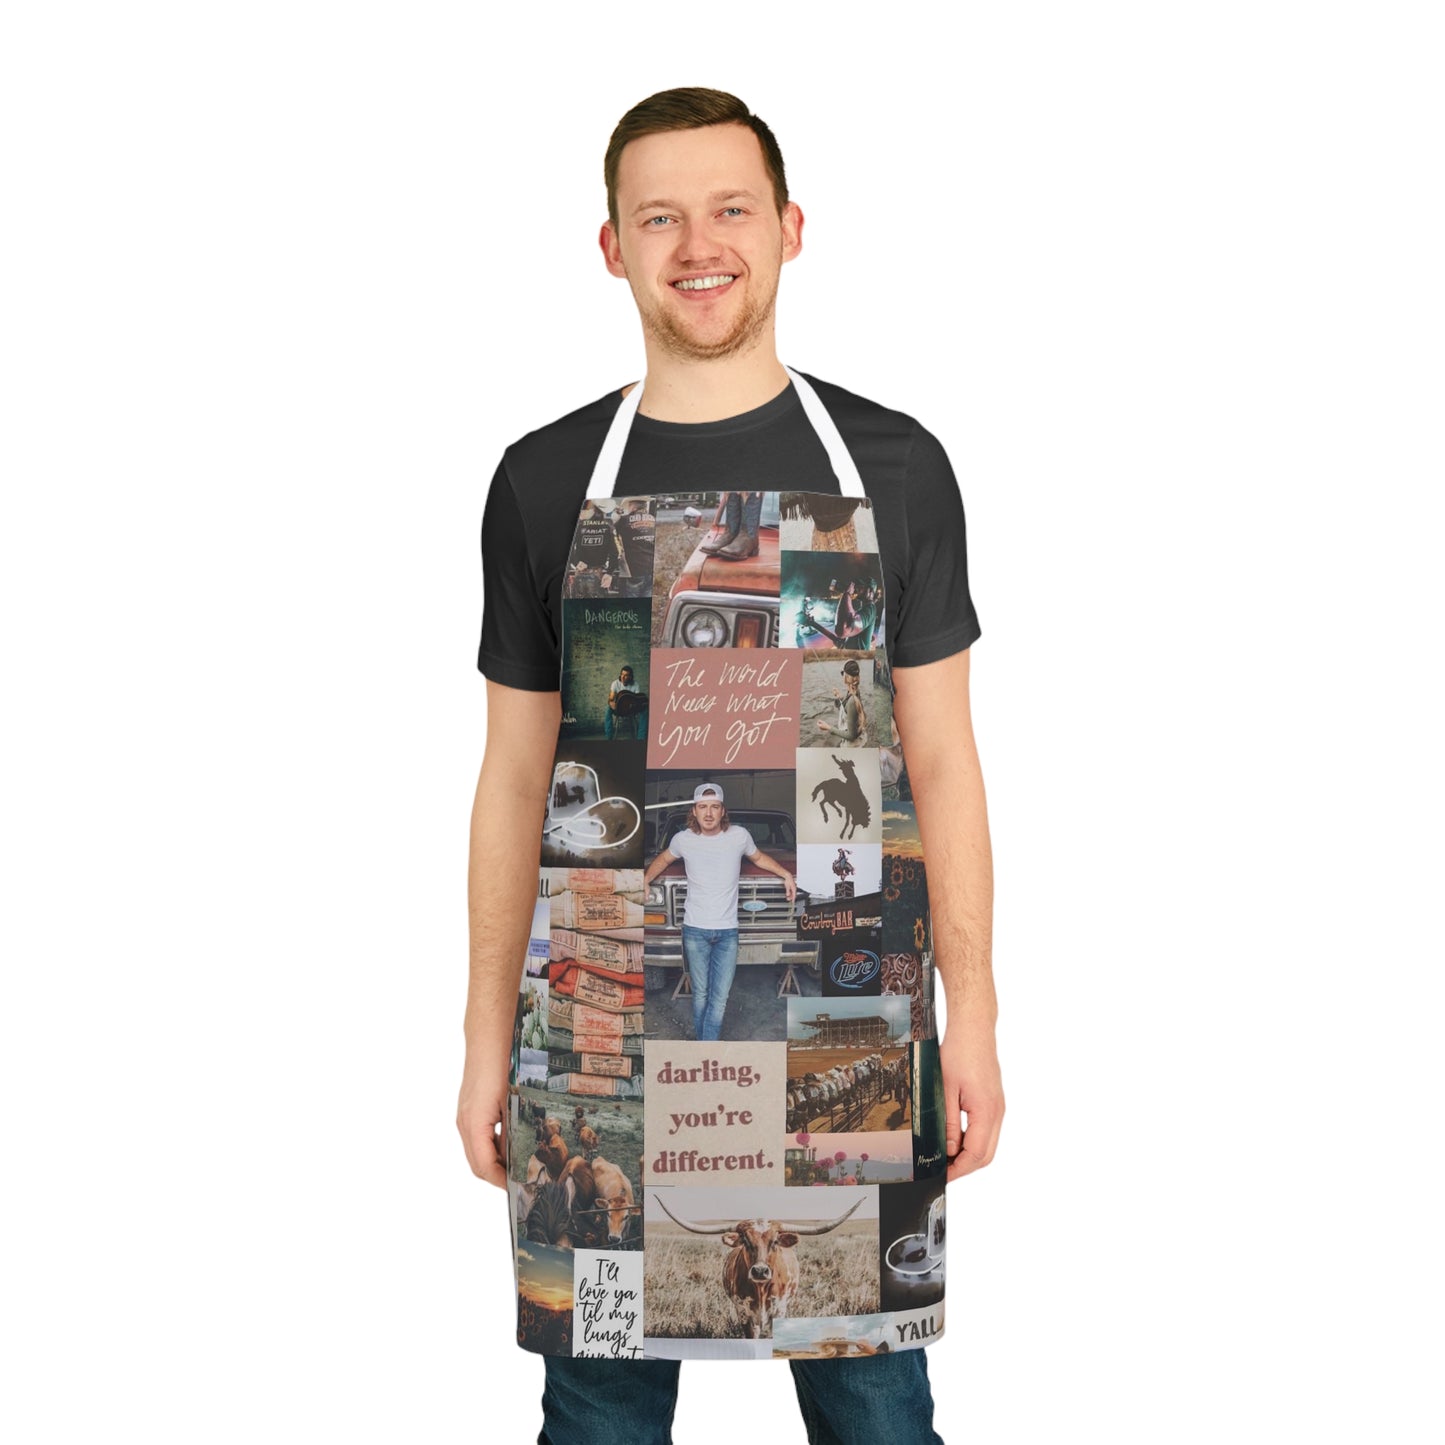 Morgan Wallen Darling You're Different Collage Apron